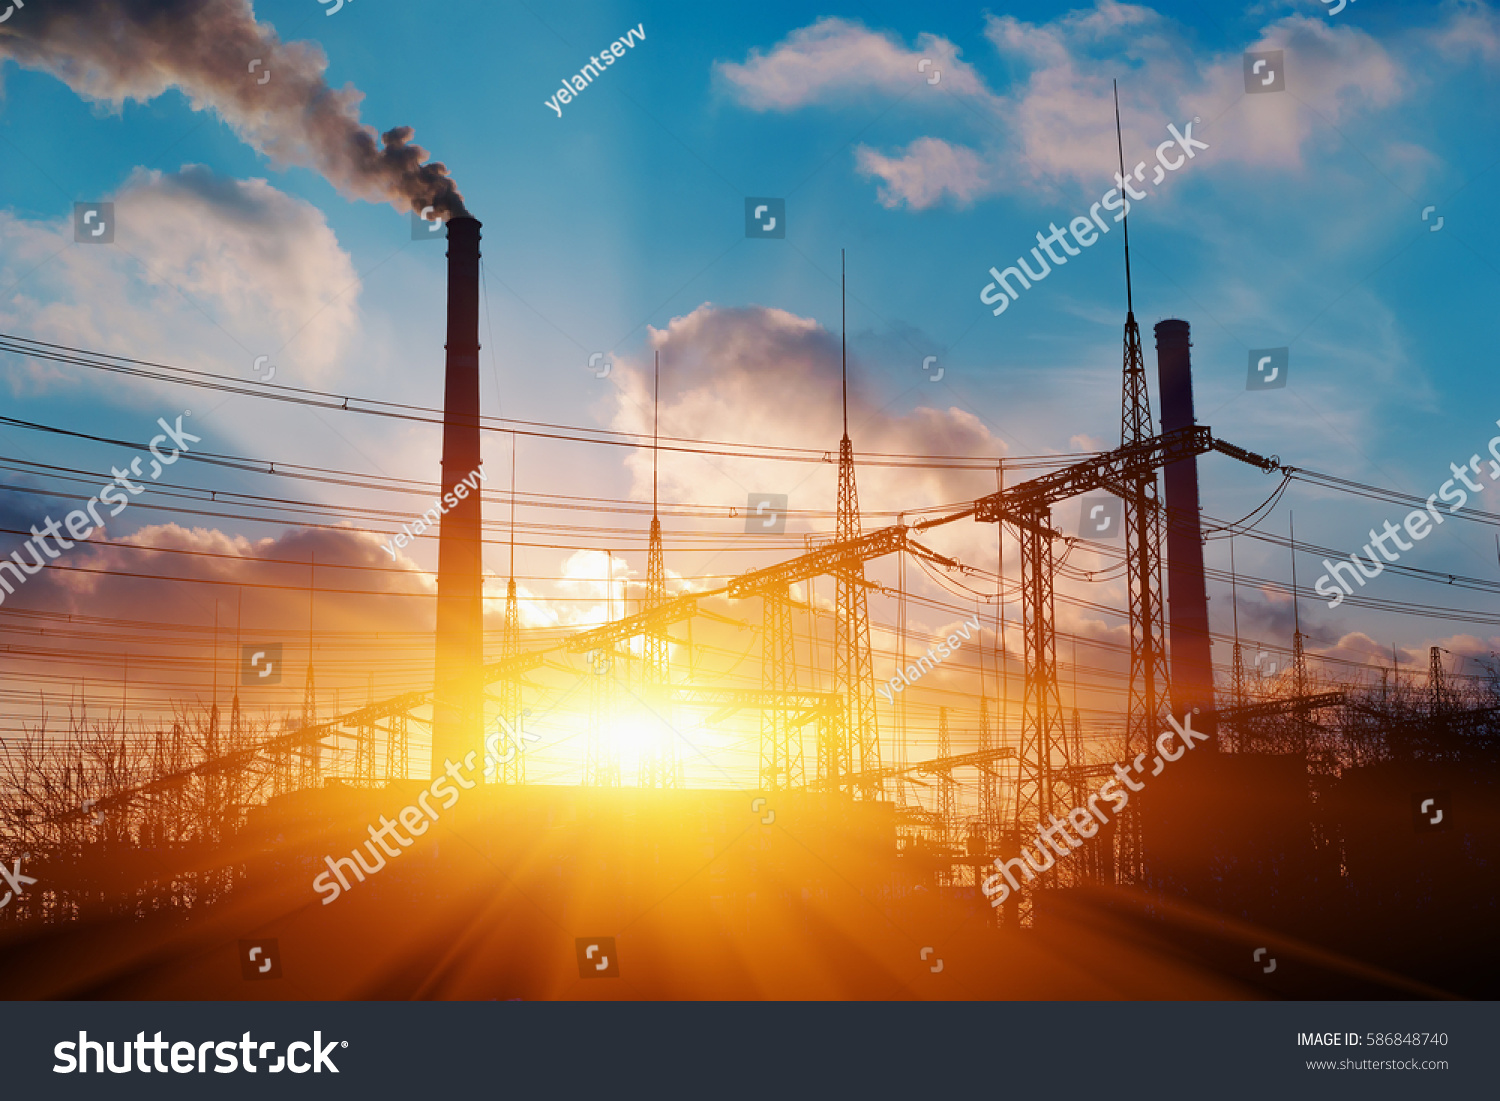 Thermal power stations and power lines during sunset #586848740